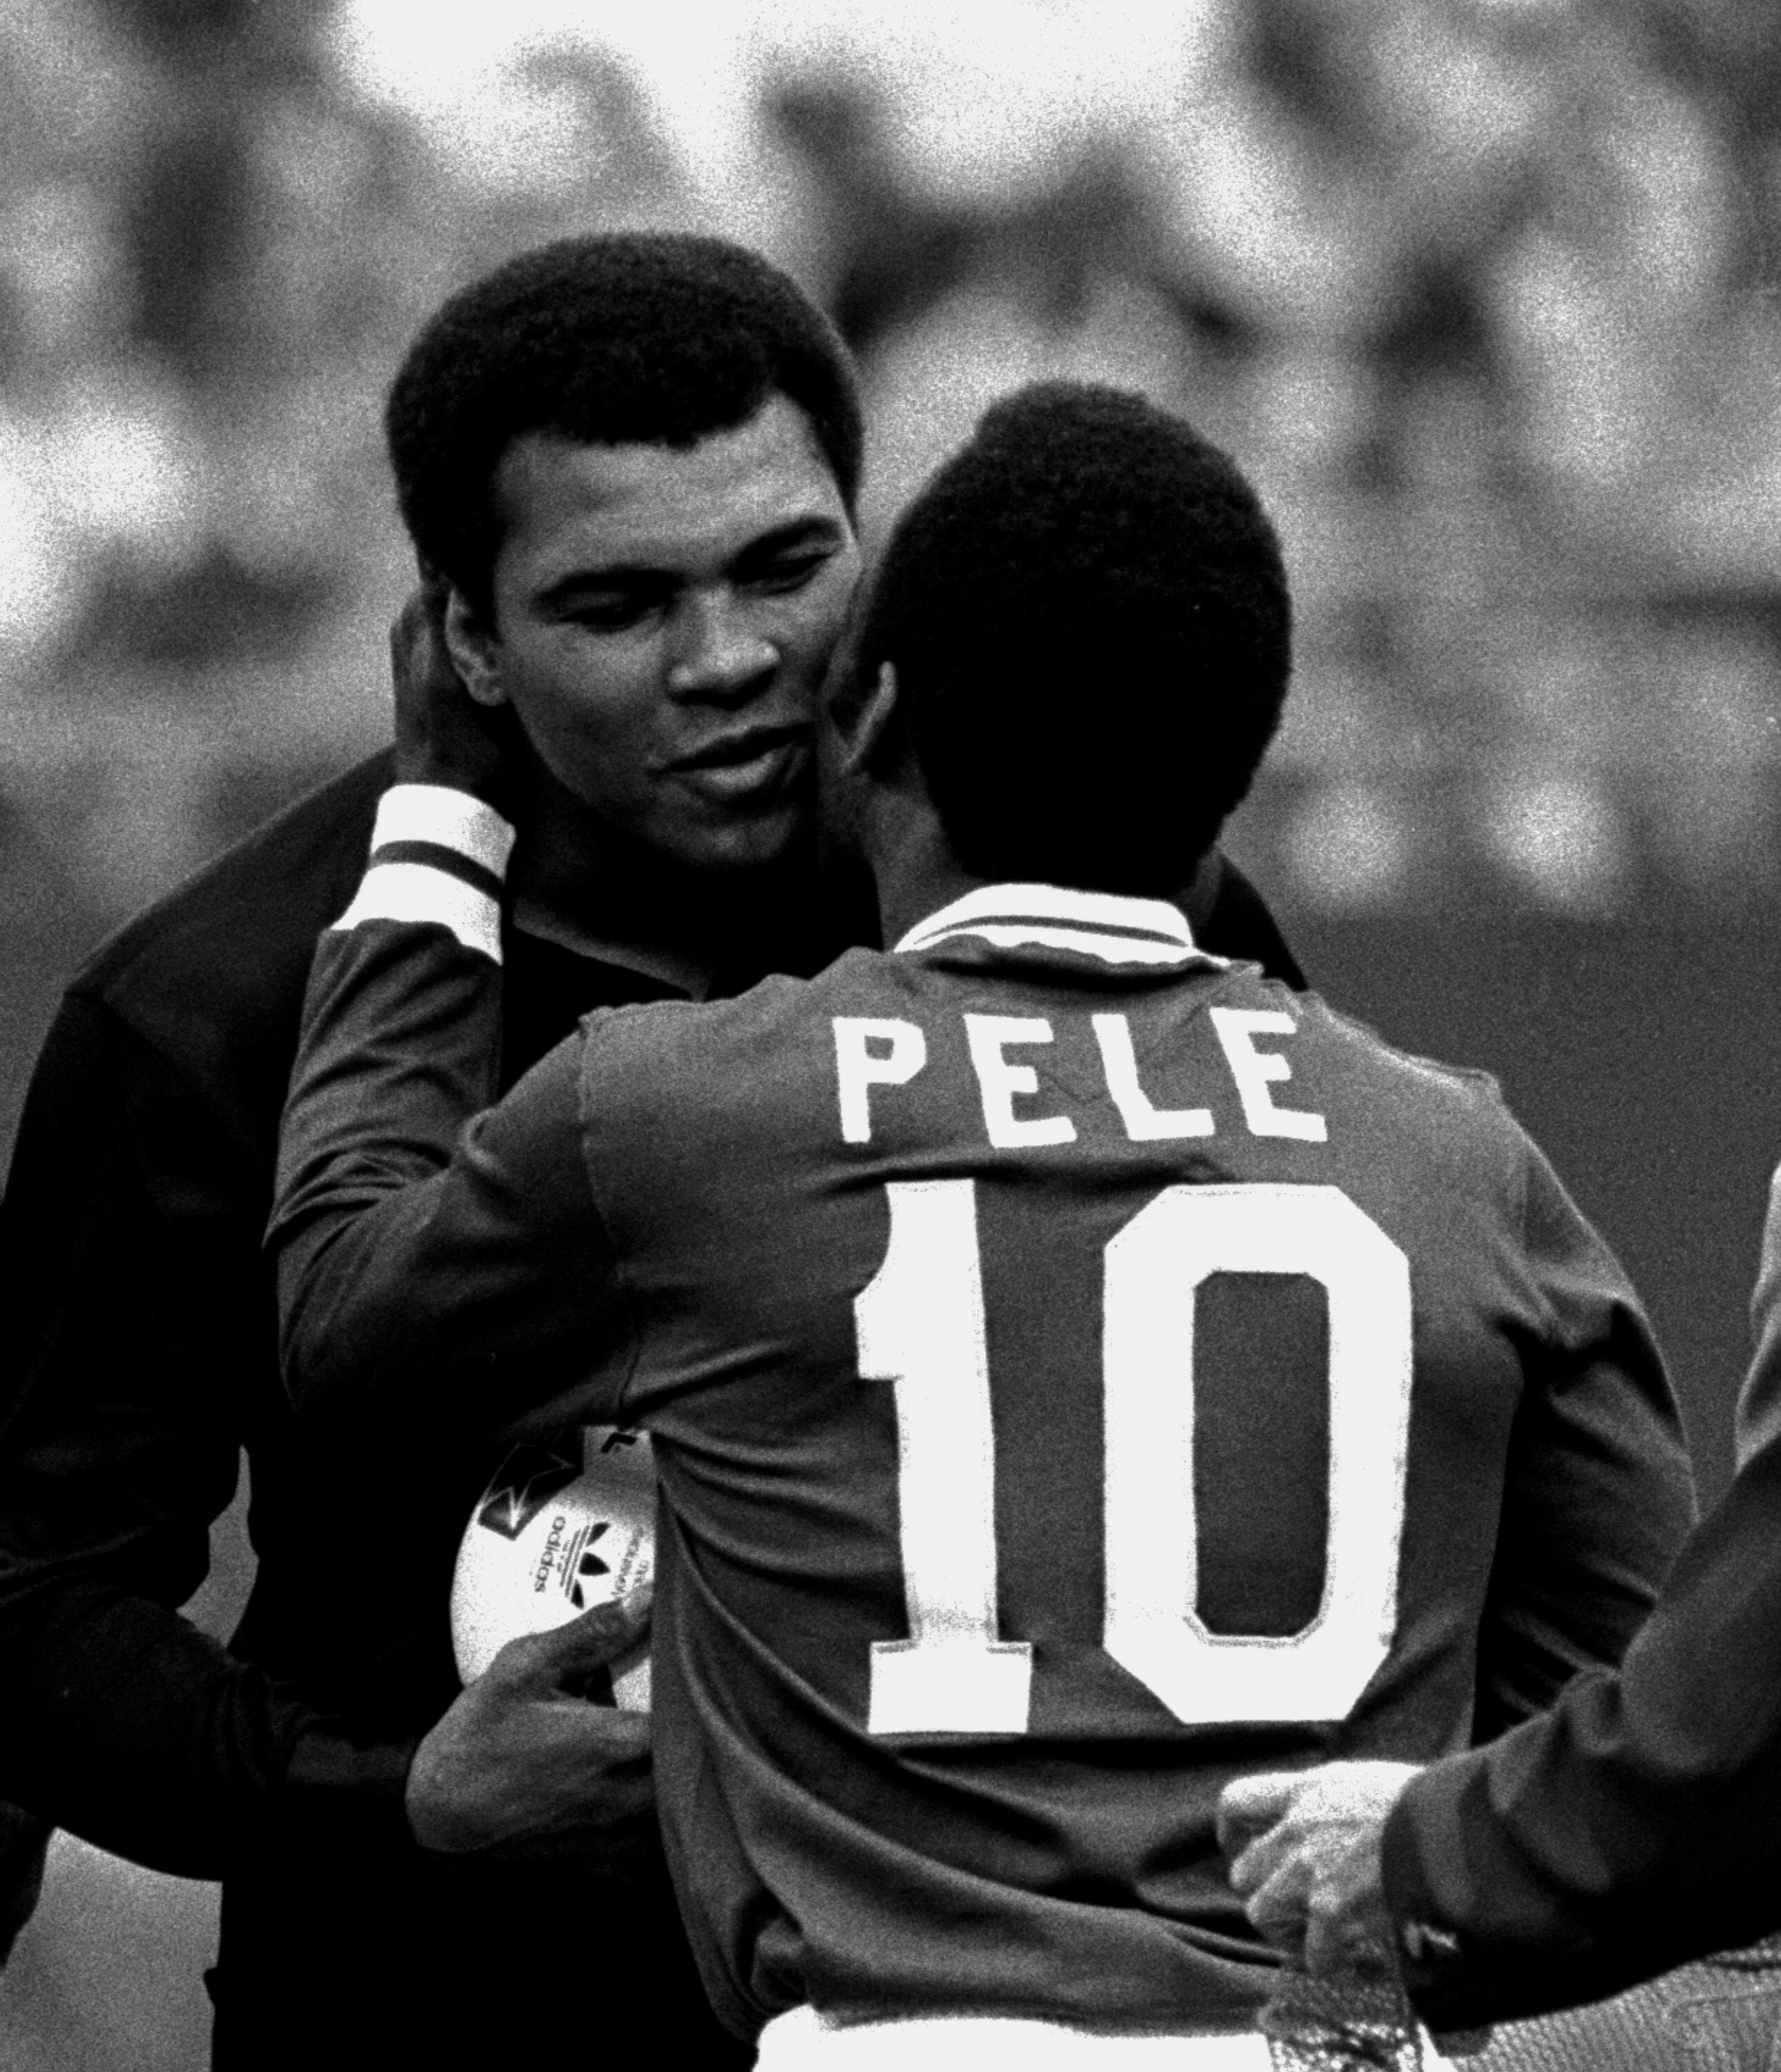 Watch: Pelé, Maradona, Messi: Who is the greatest of all time